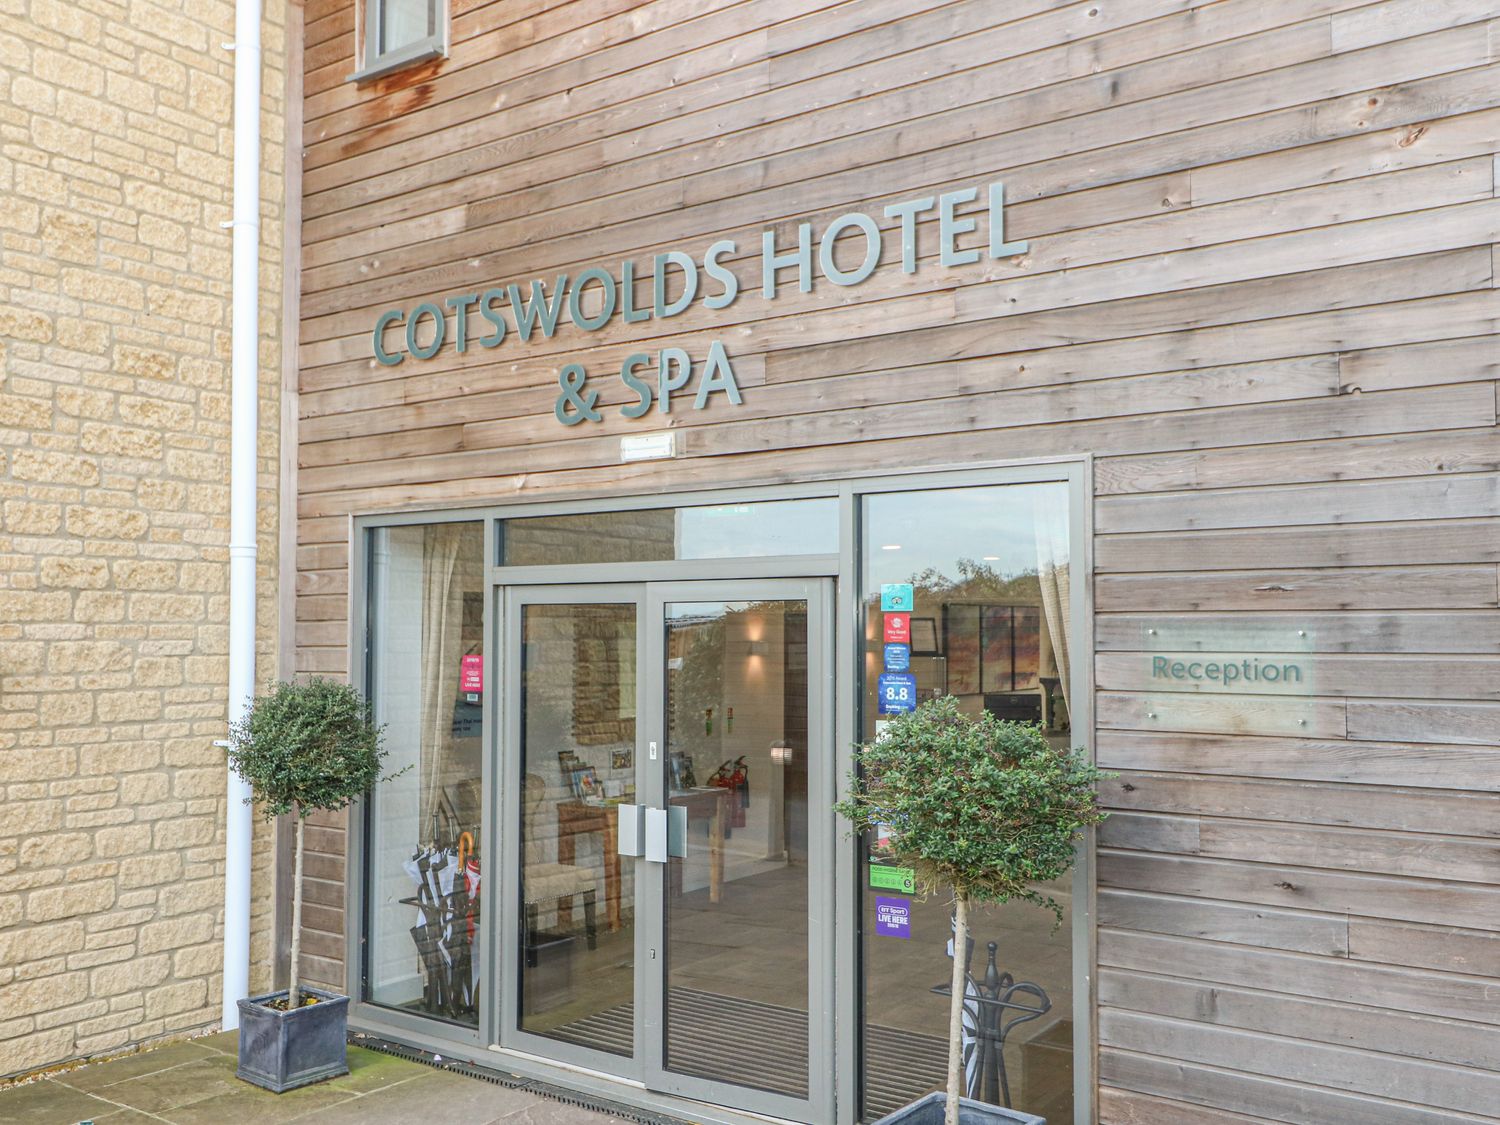 Cotswold Club Apartment 4 Bedrooms - Cotswolds - 1035057 - photo 1